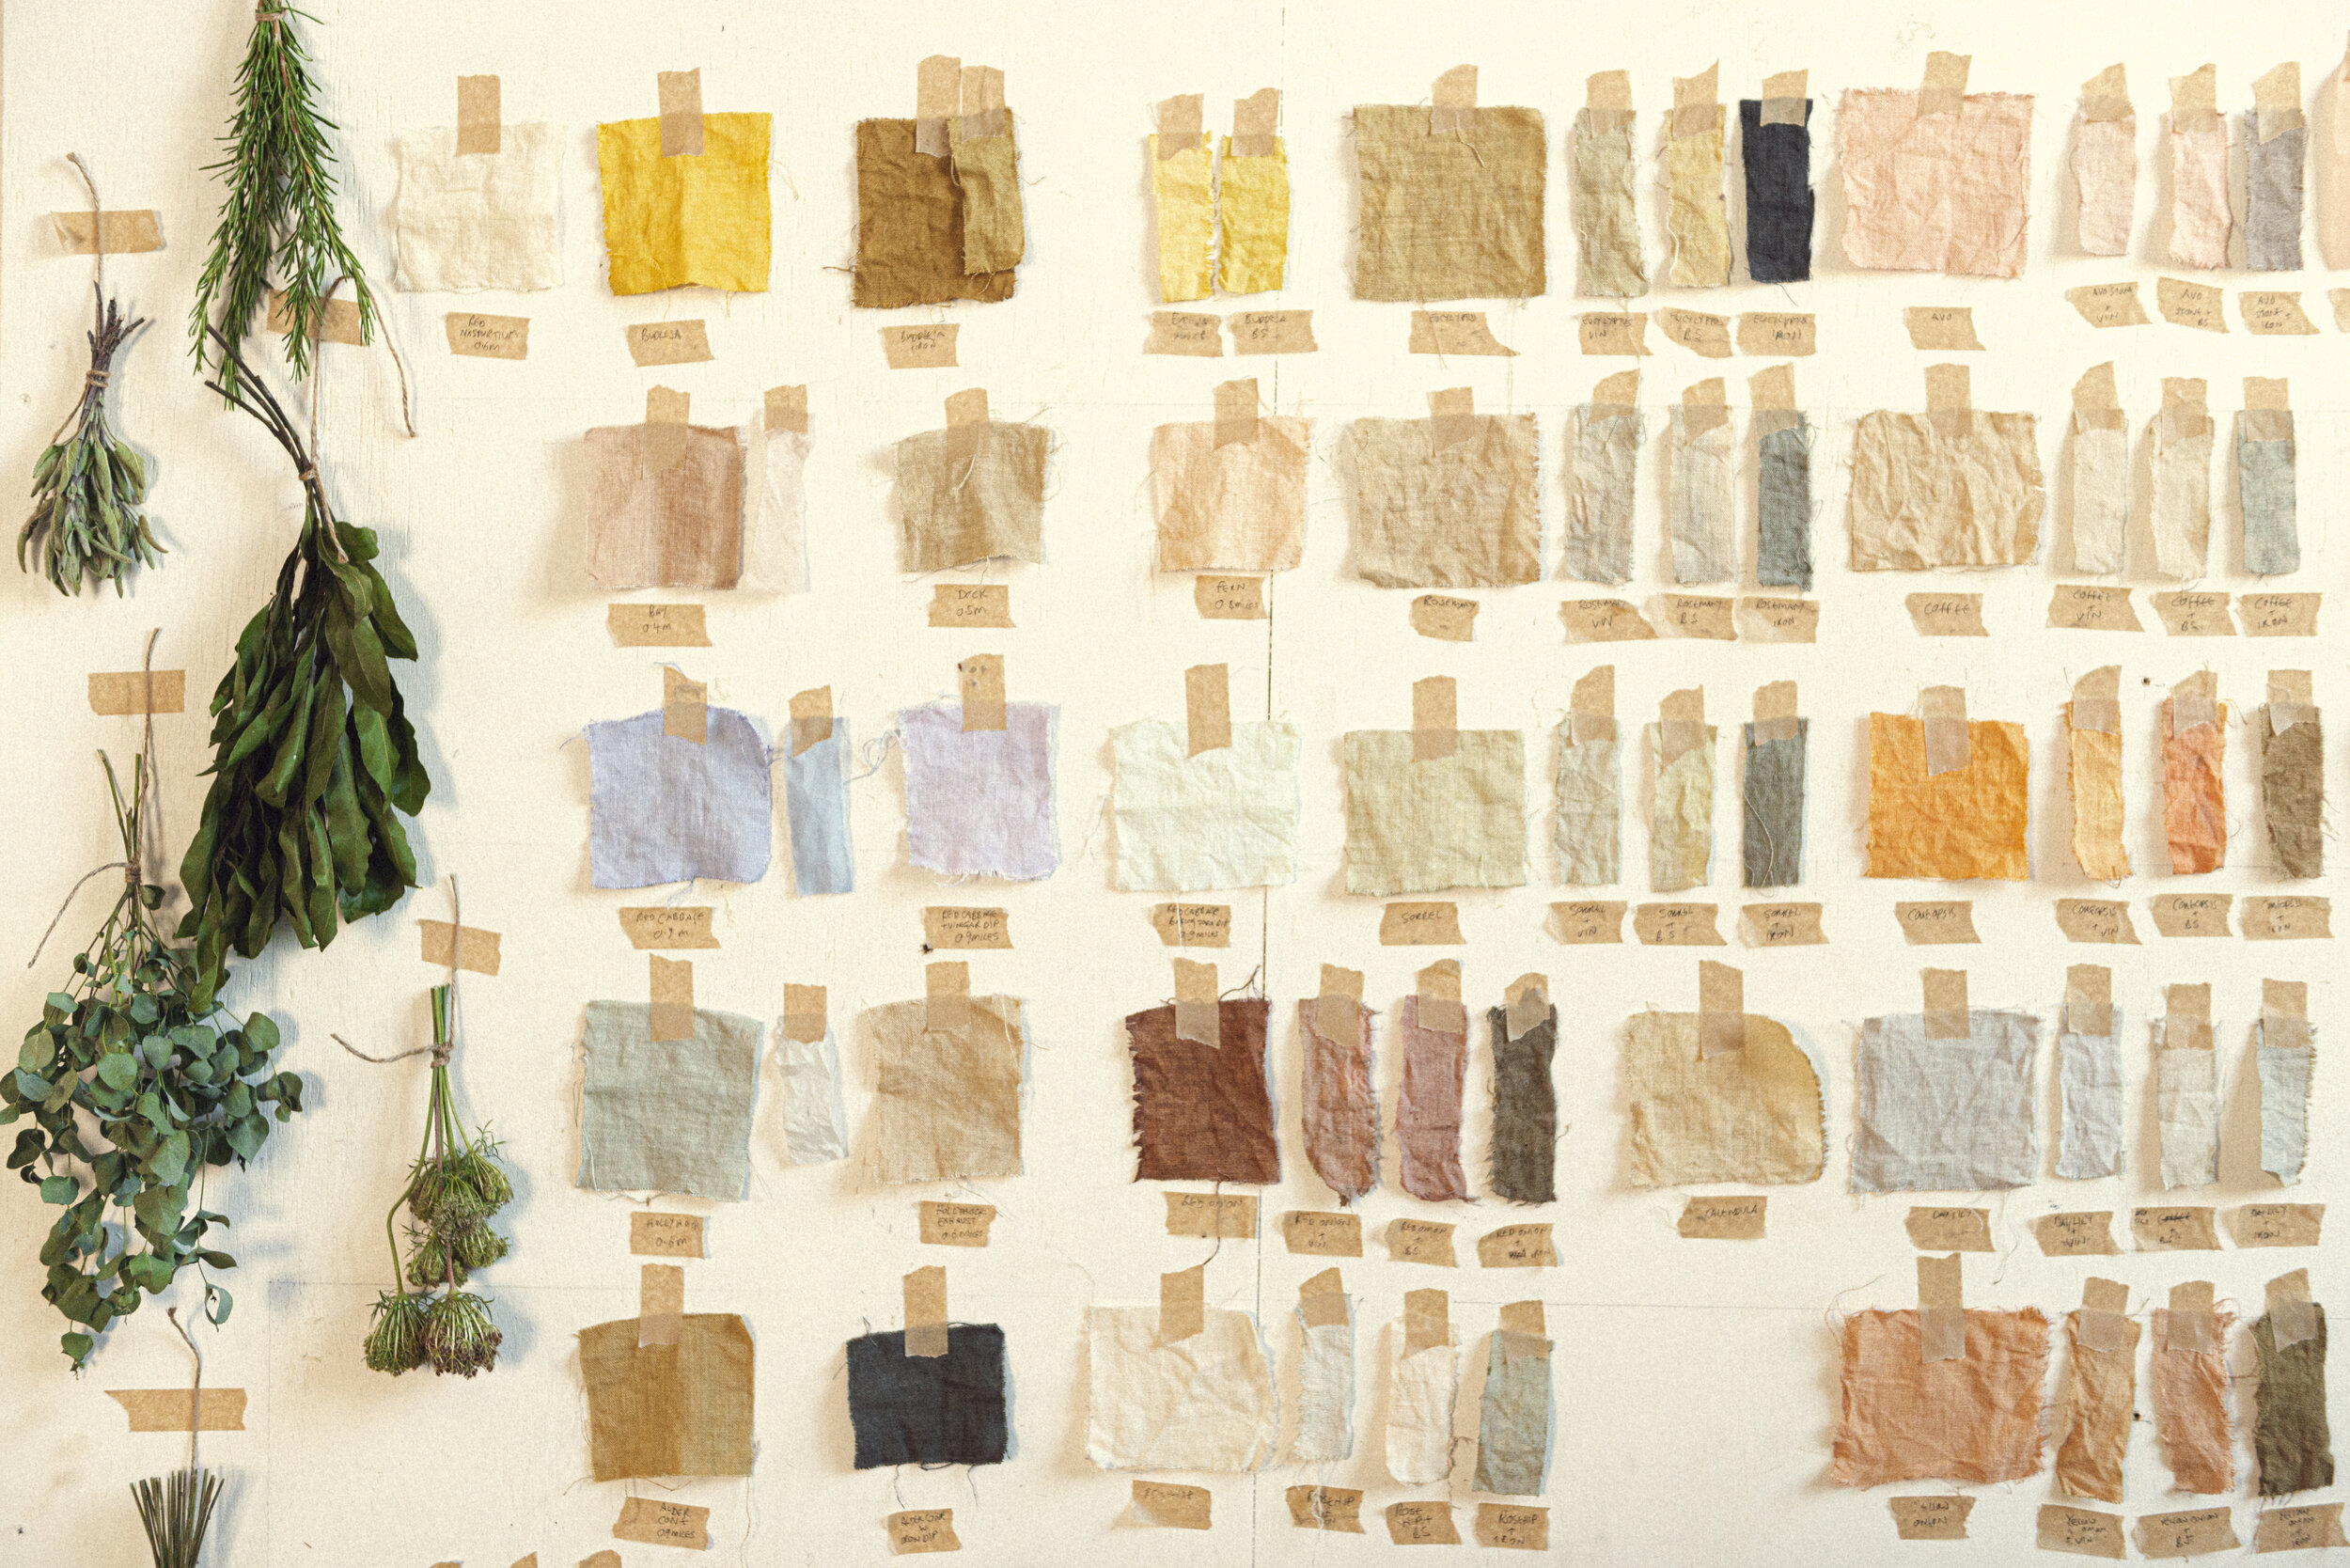 91 Magazine's Meet The Maker - The Natural Dyeworks